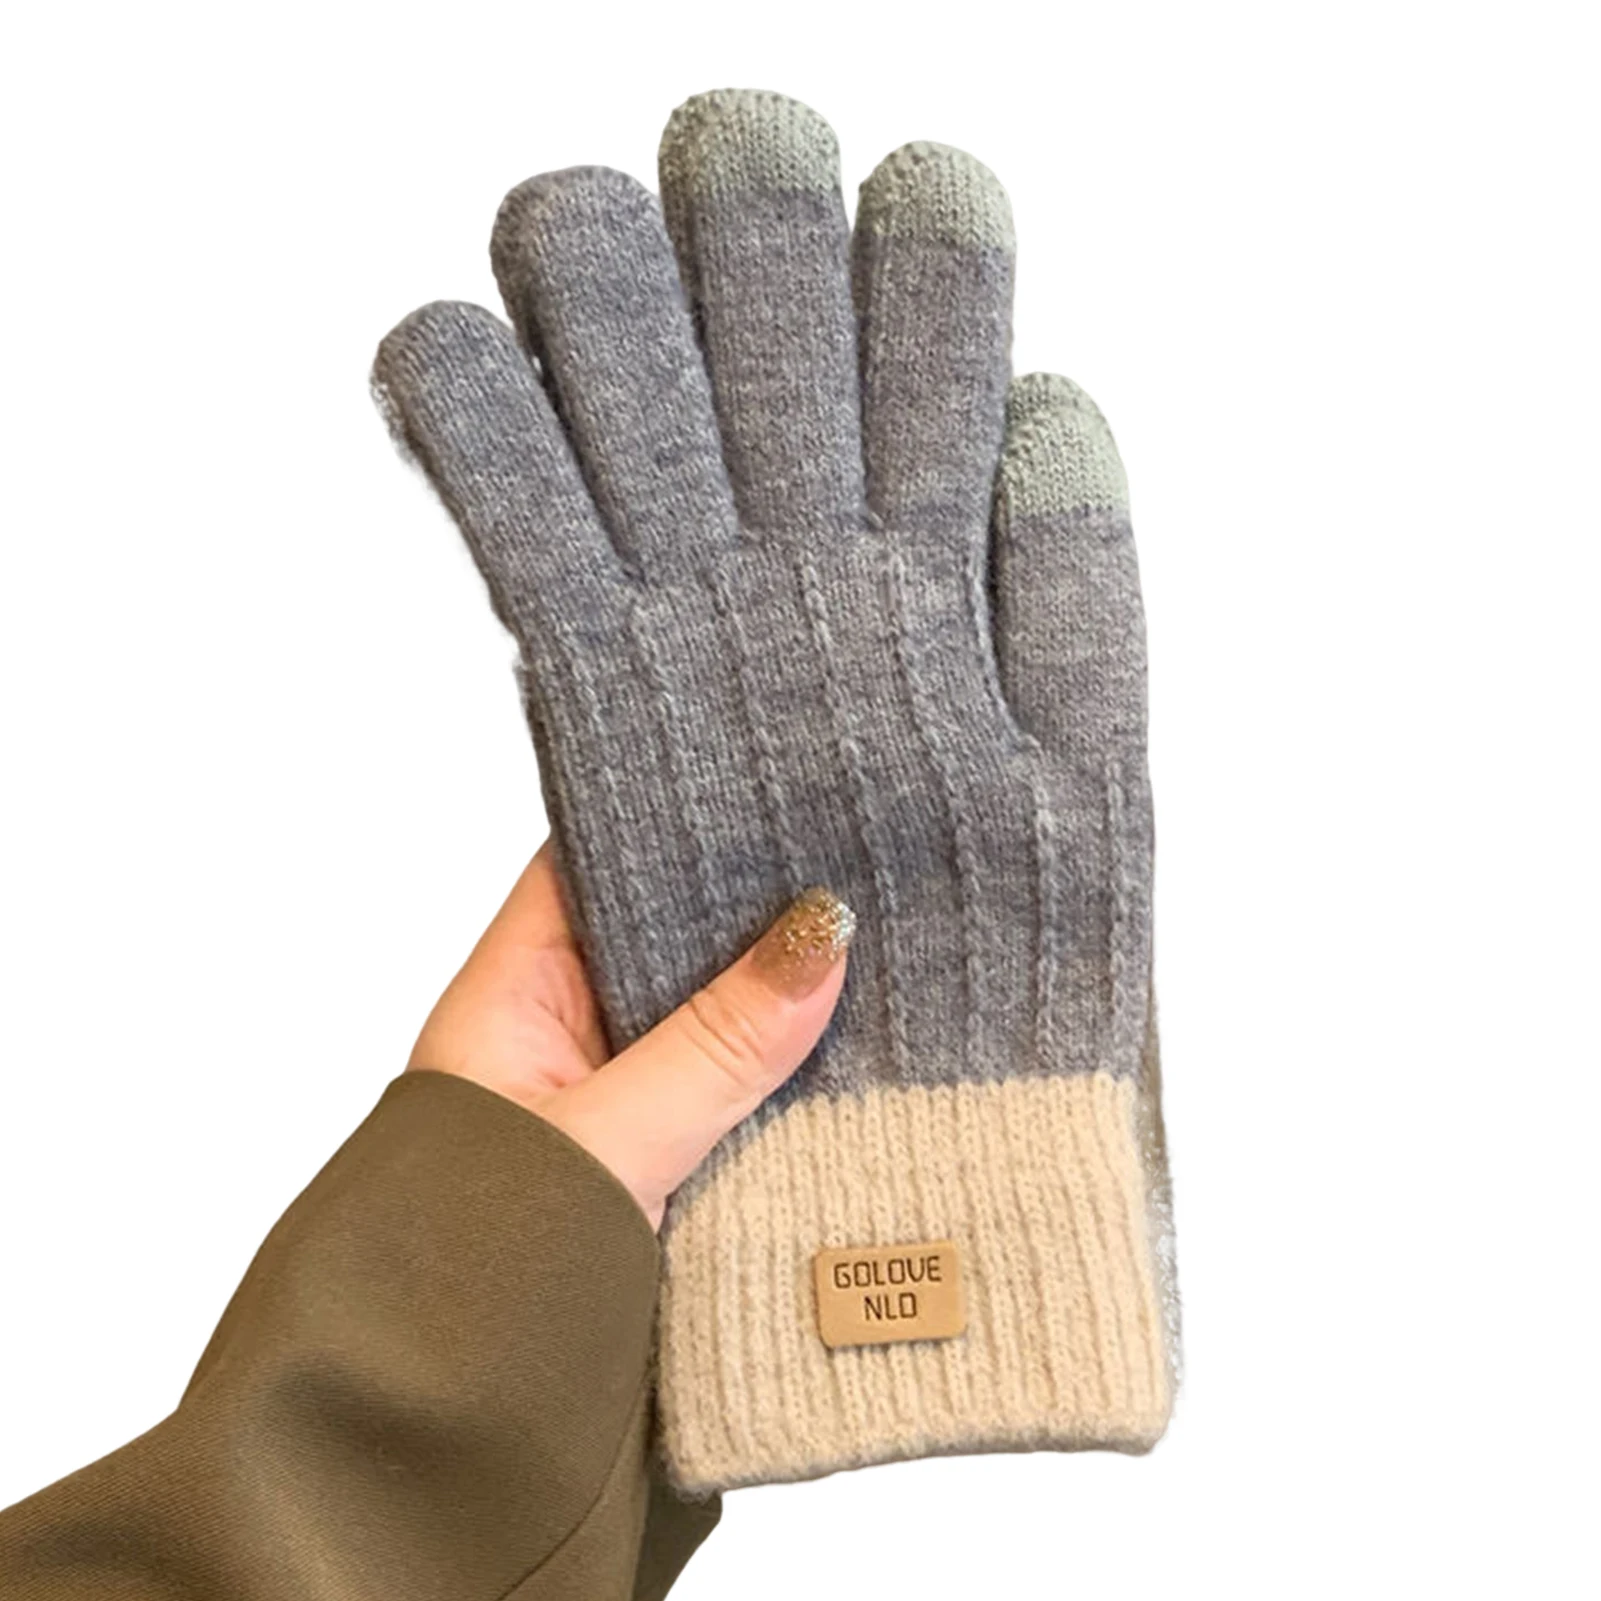 

Women's Winter Touchscreen Gloves Warm Fleece Lined Knit Gloves with Touchscreen for Cold Weather Protect Hands